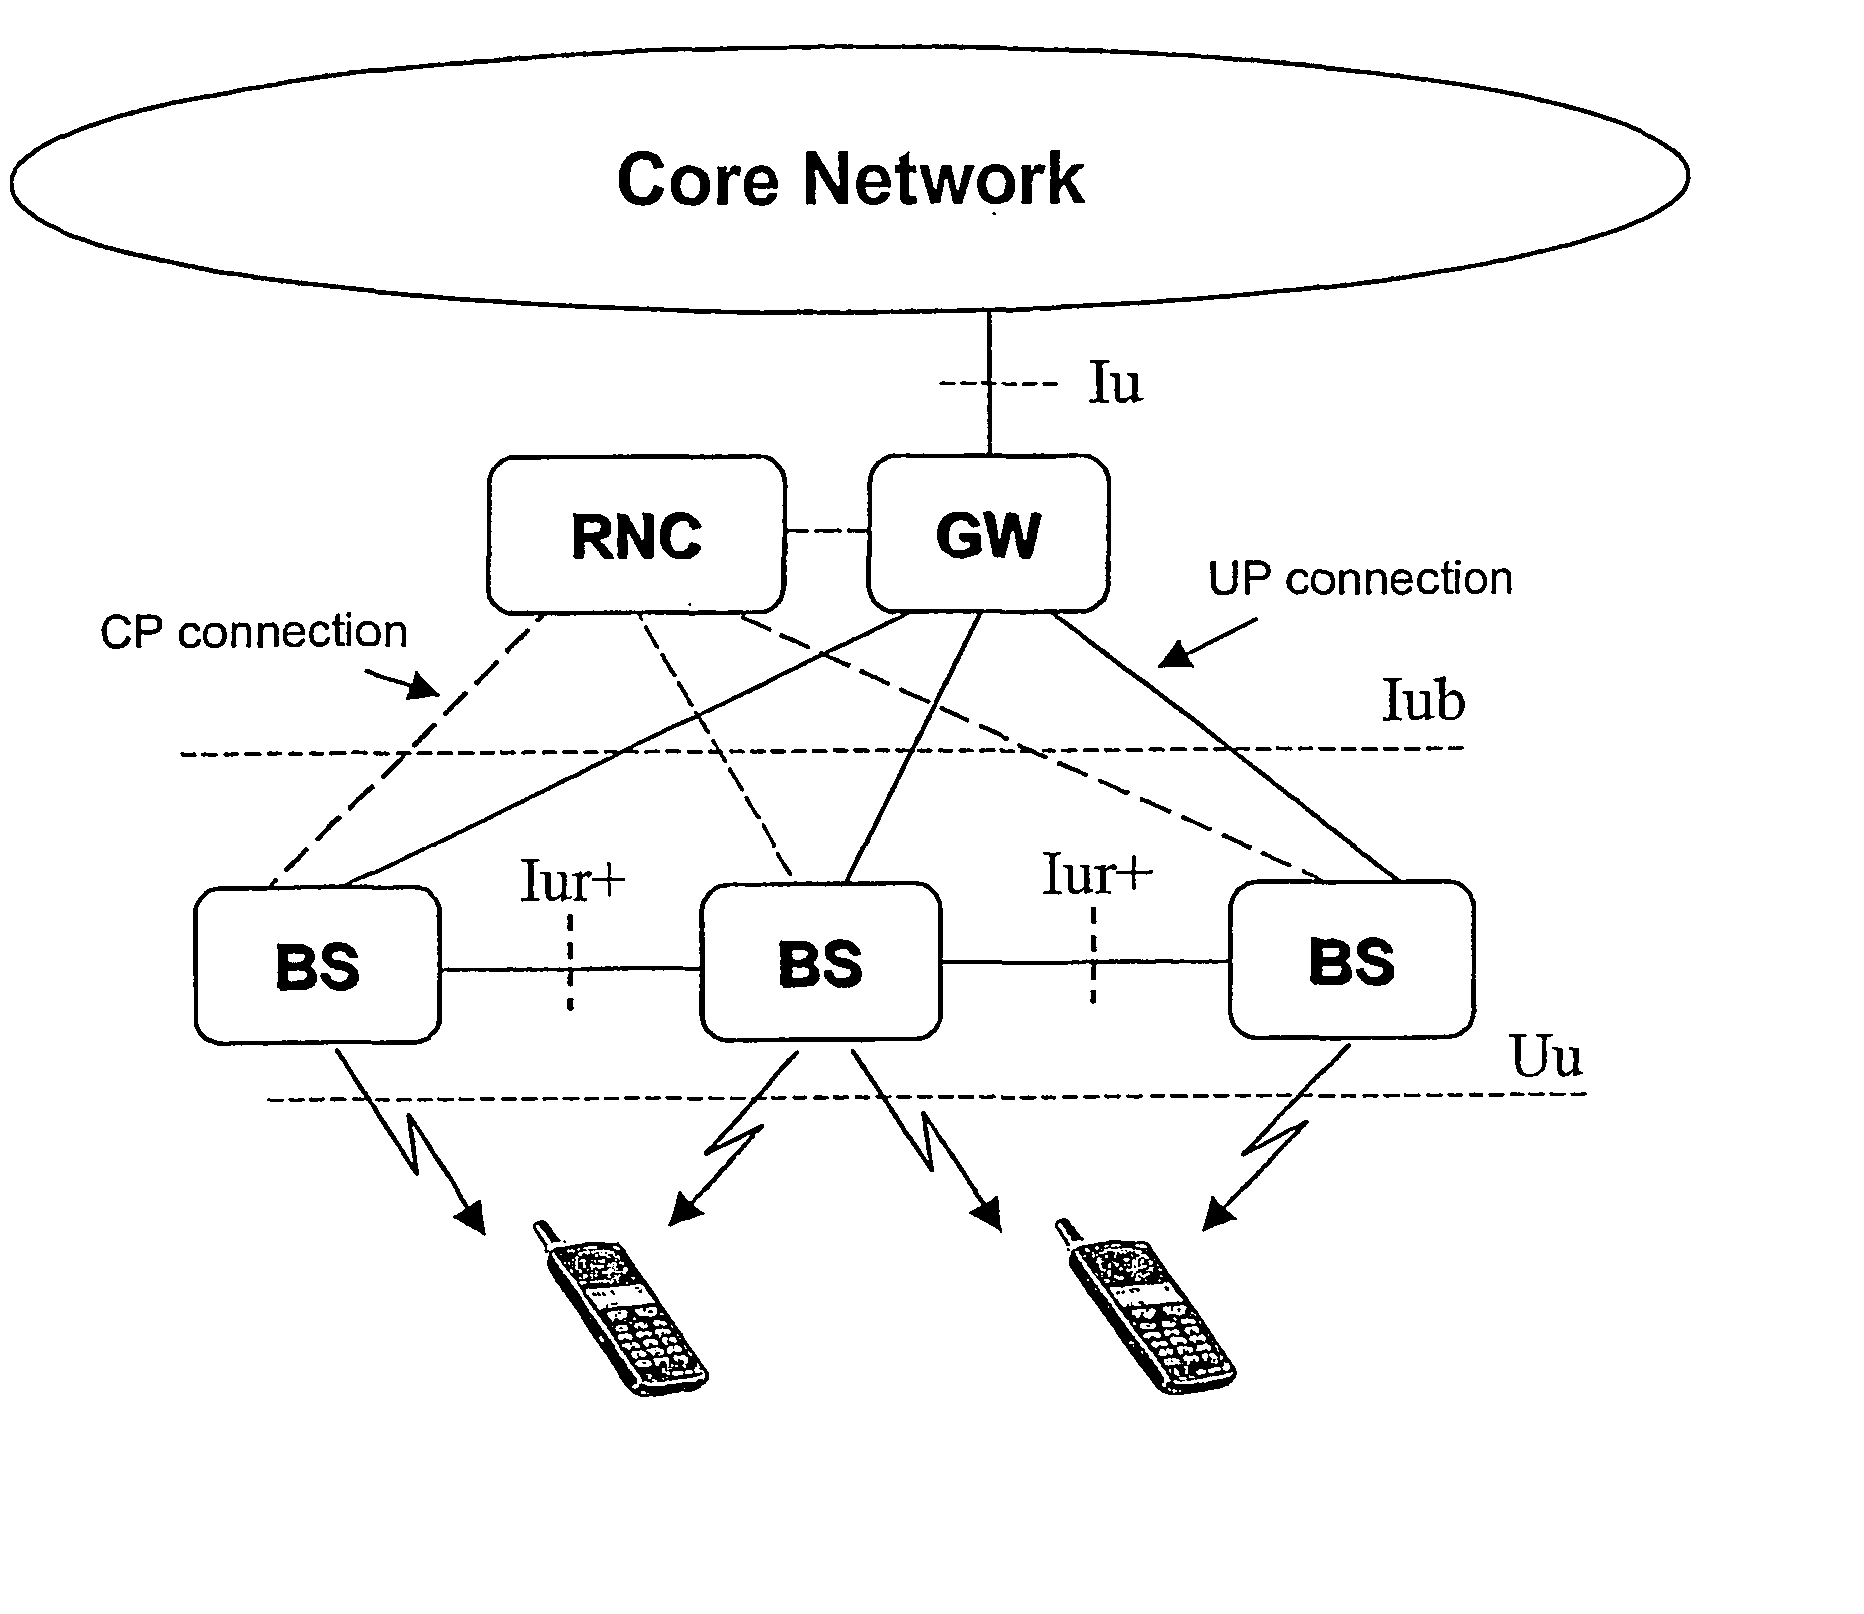 Transmission control method in a radio access network implementing an automatic repetition request (aqr) protocol at the base station (aqr)